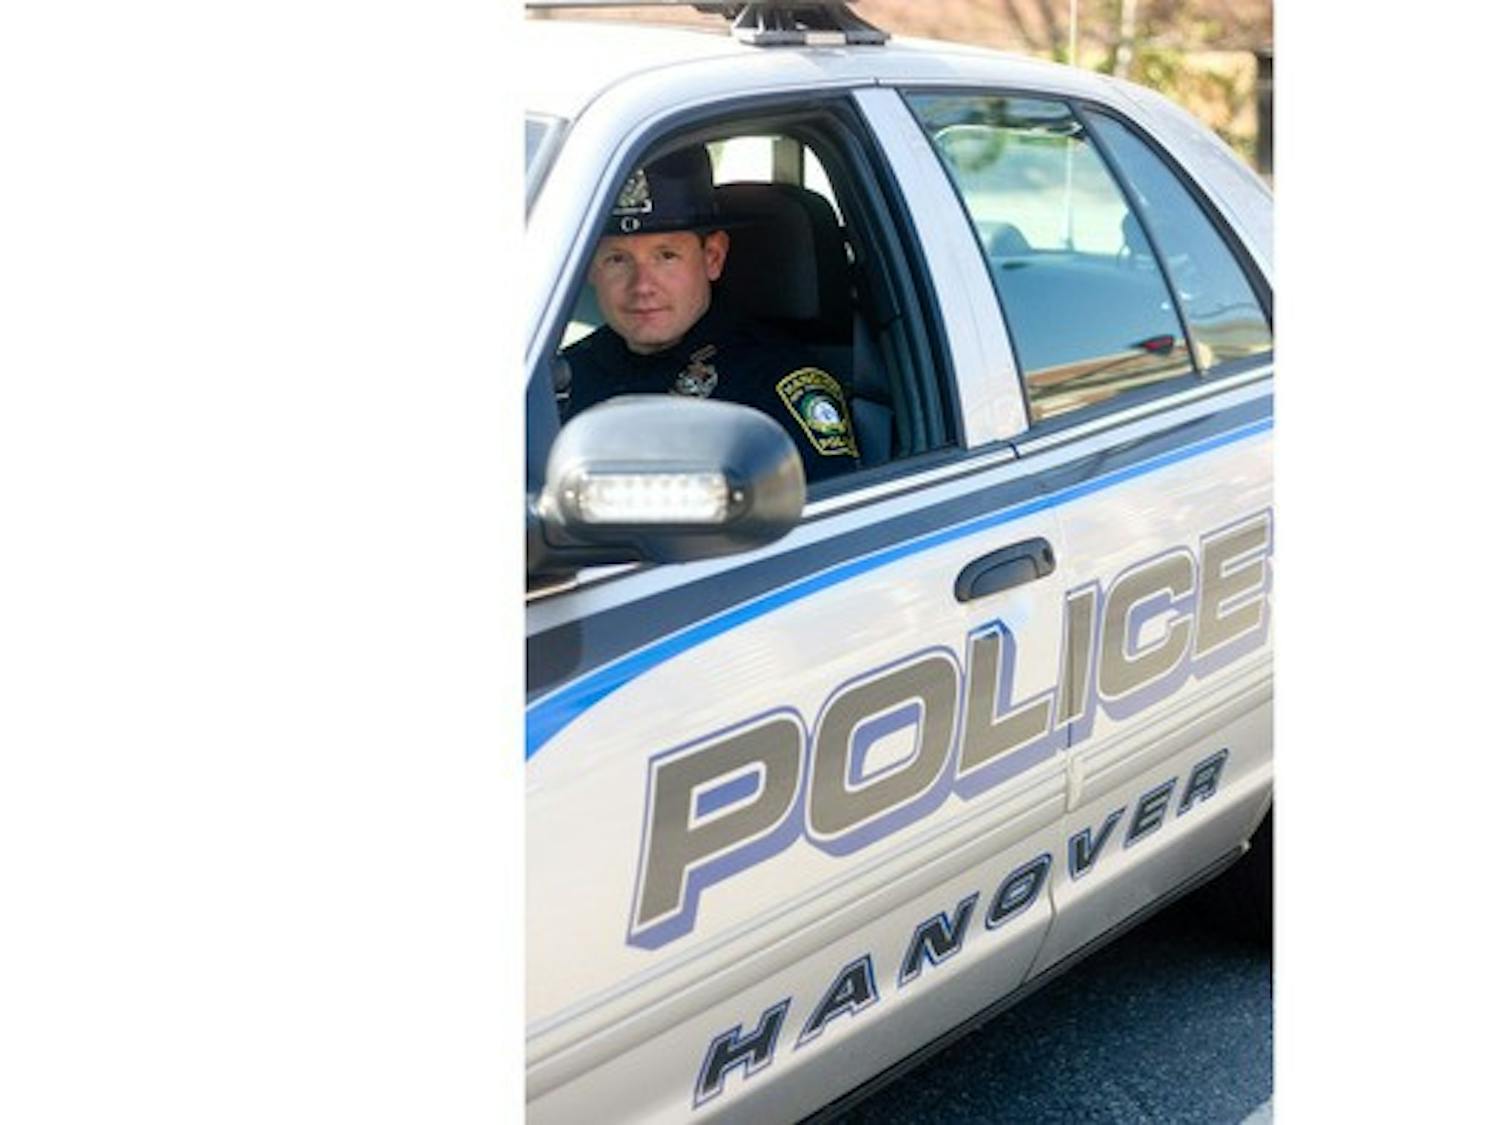 The new alcohol proposal, announced by Hanover Police Chief Nicholas Giaccone last week, has been condemned by Greek leaders and other students.